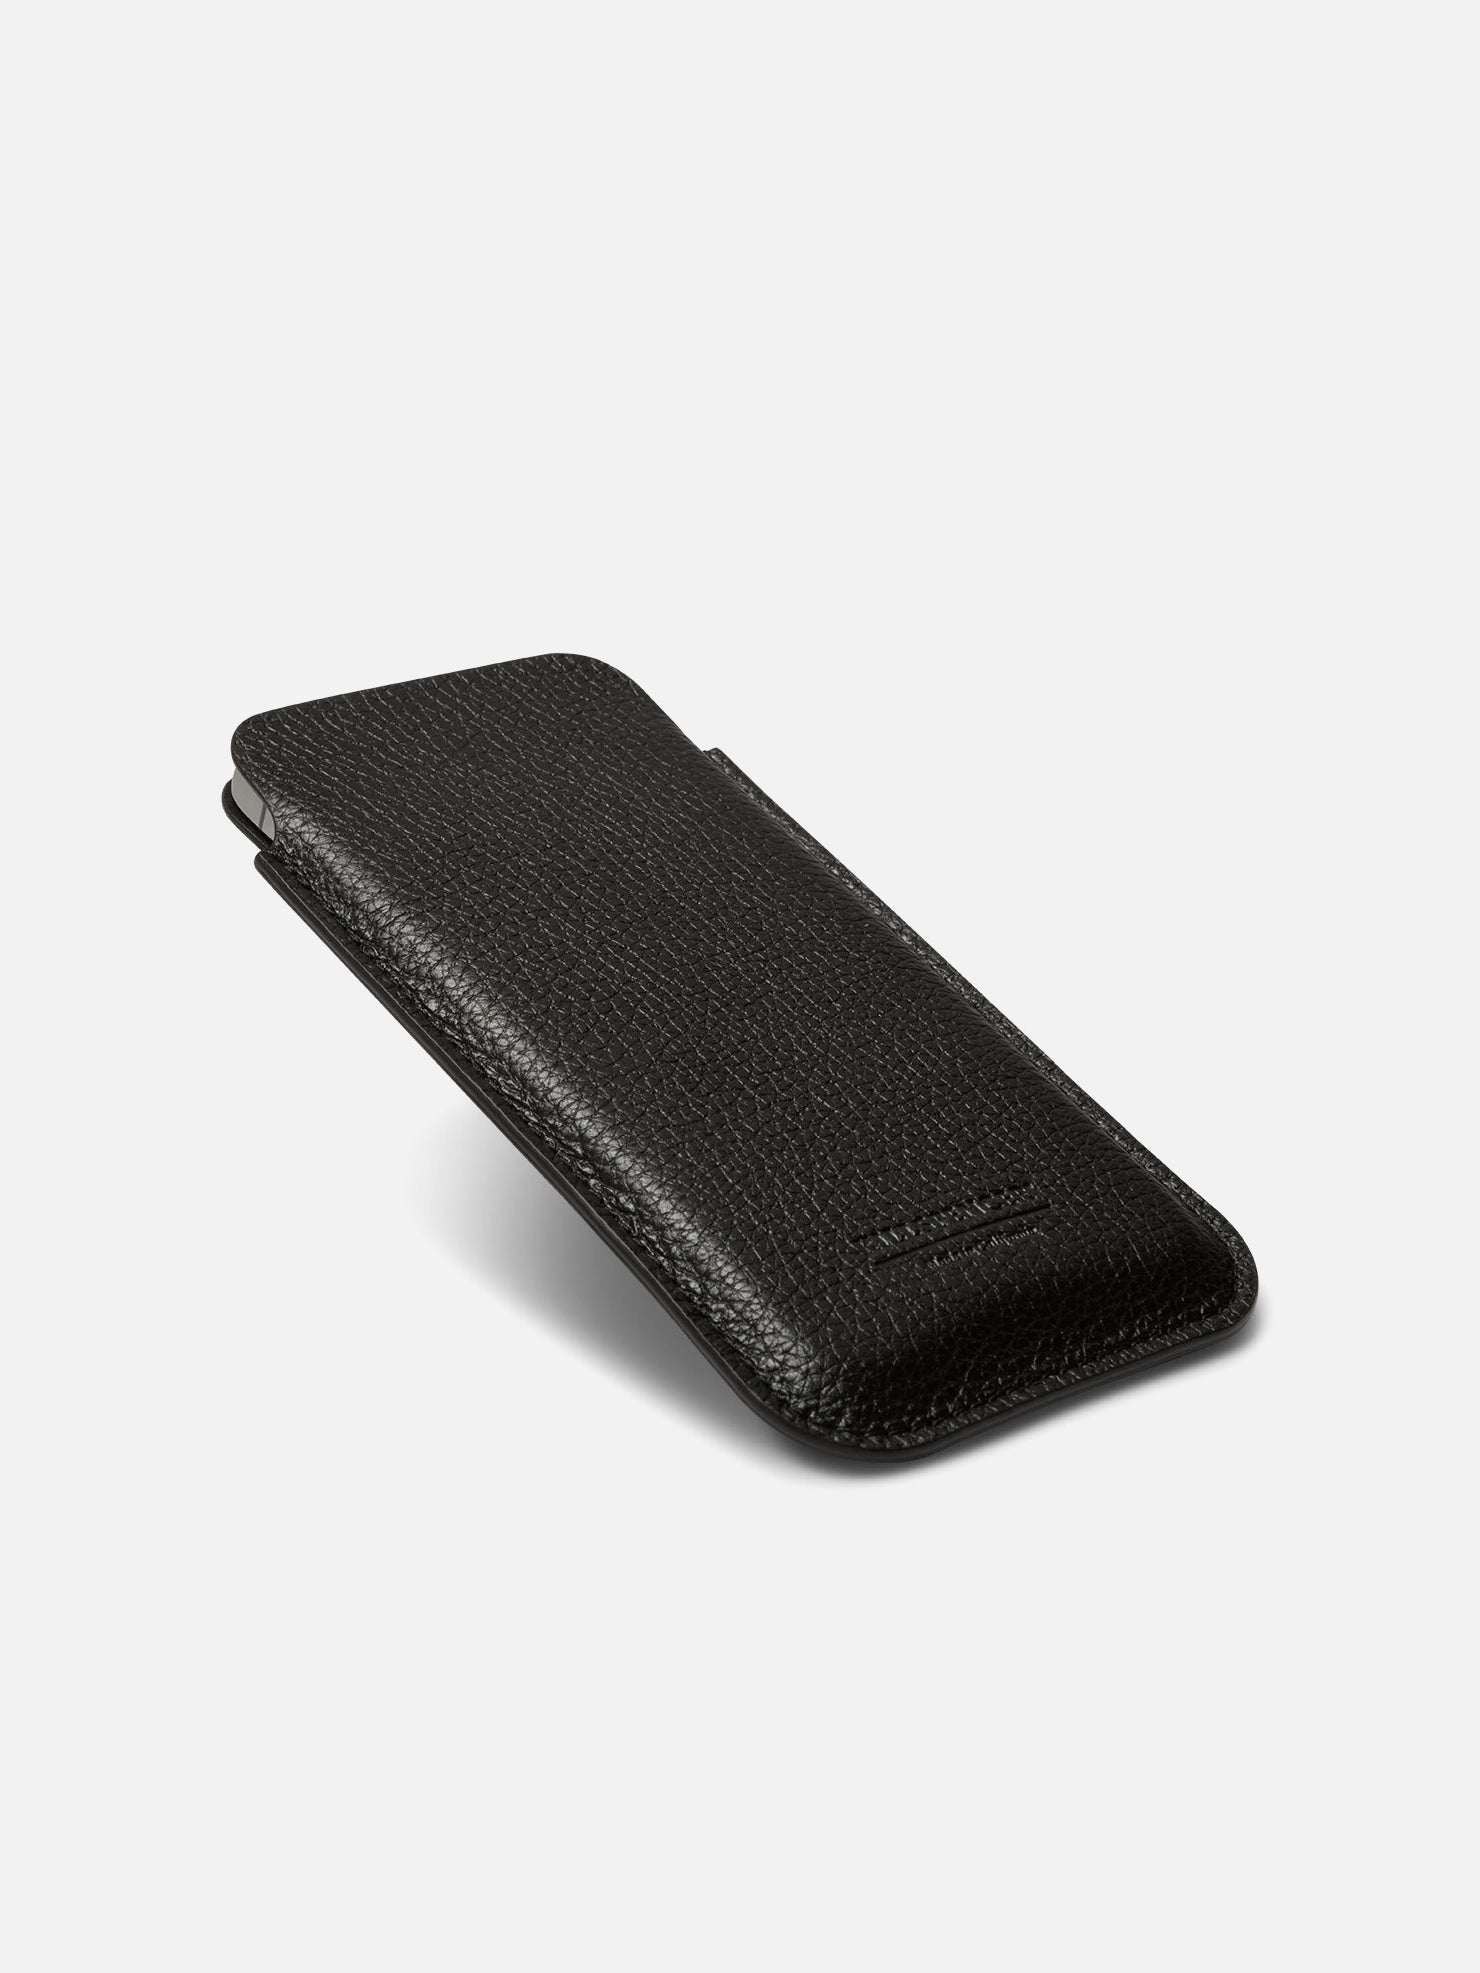 POUCH FOR IPHONE | KILLSPENCER® - Black Leather